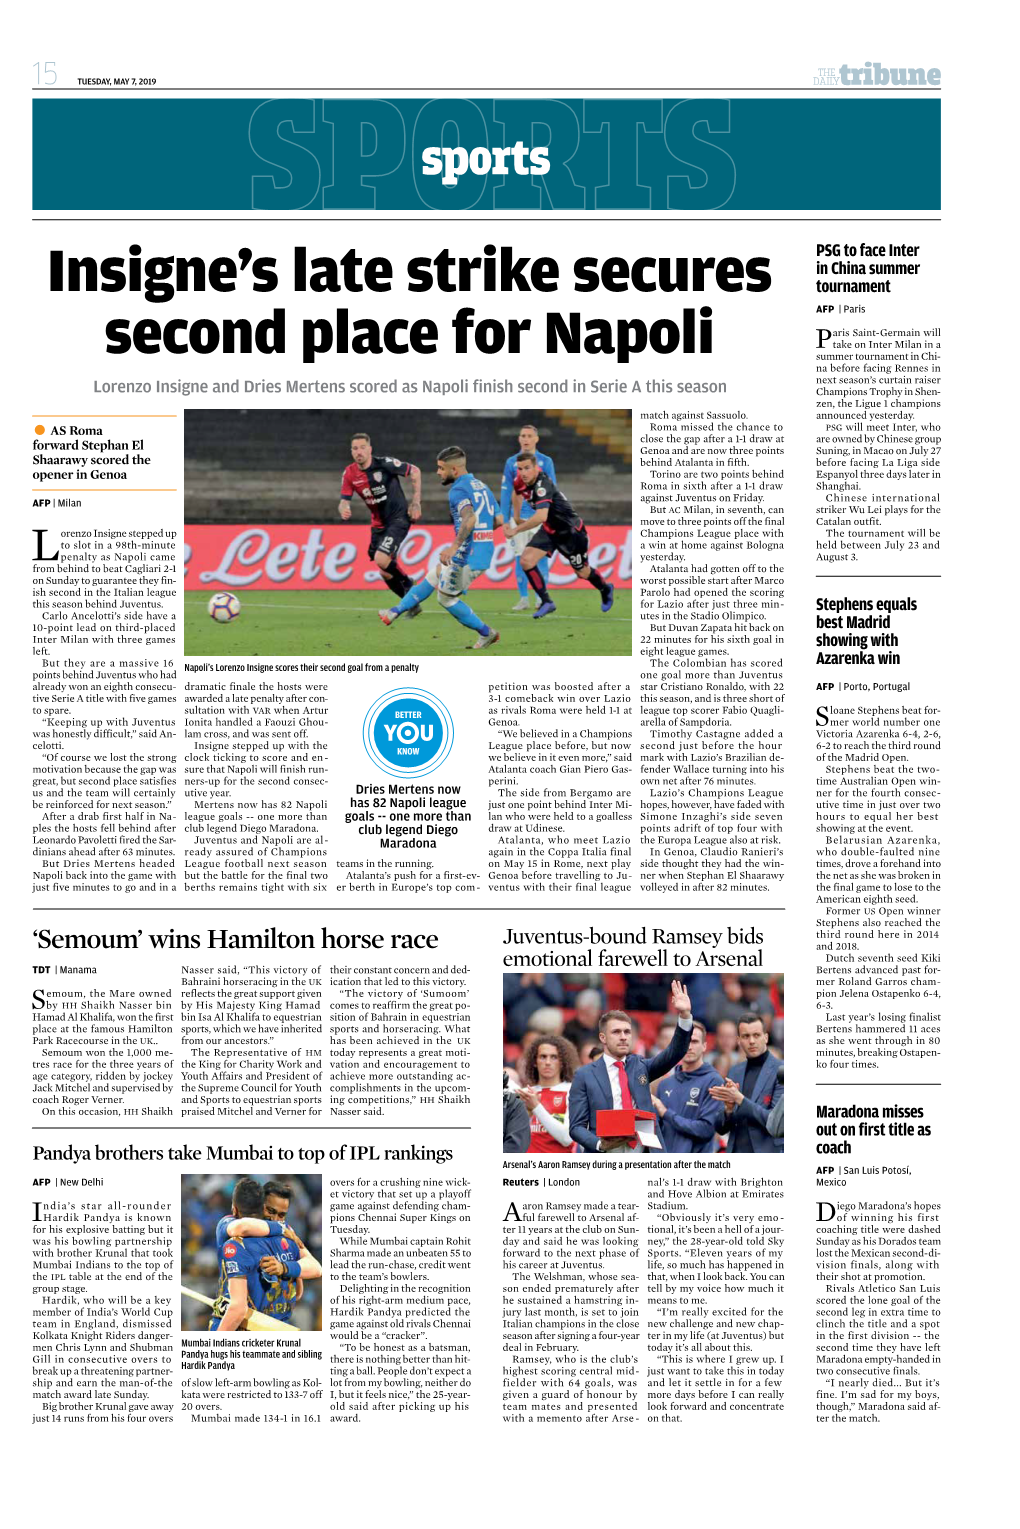 Insigne's Late Strike Secures Second Place for Napoli